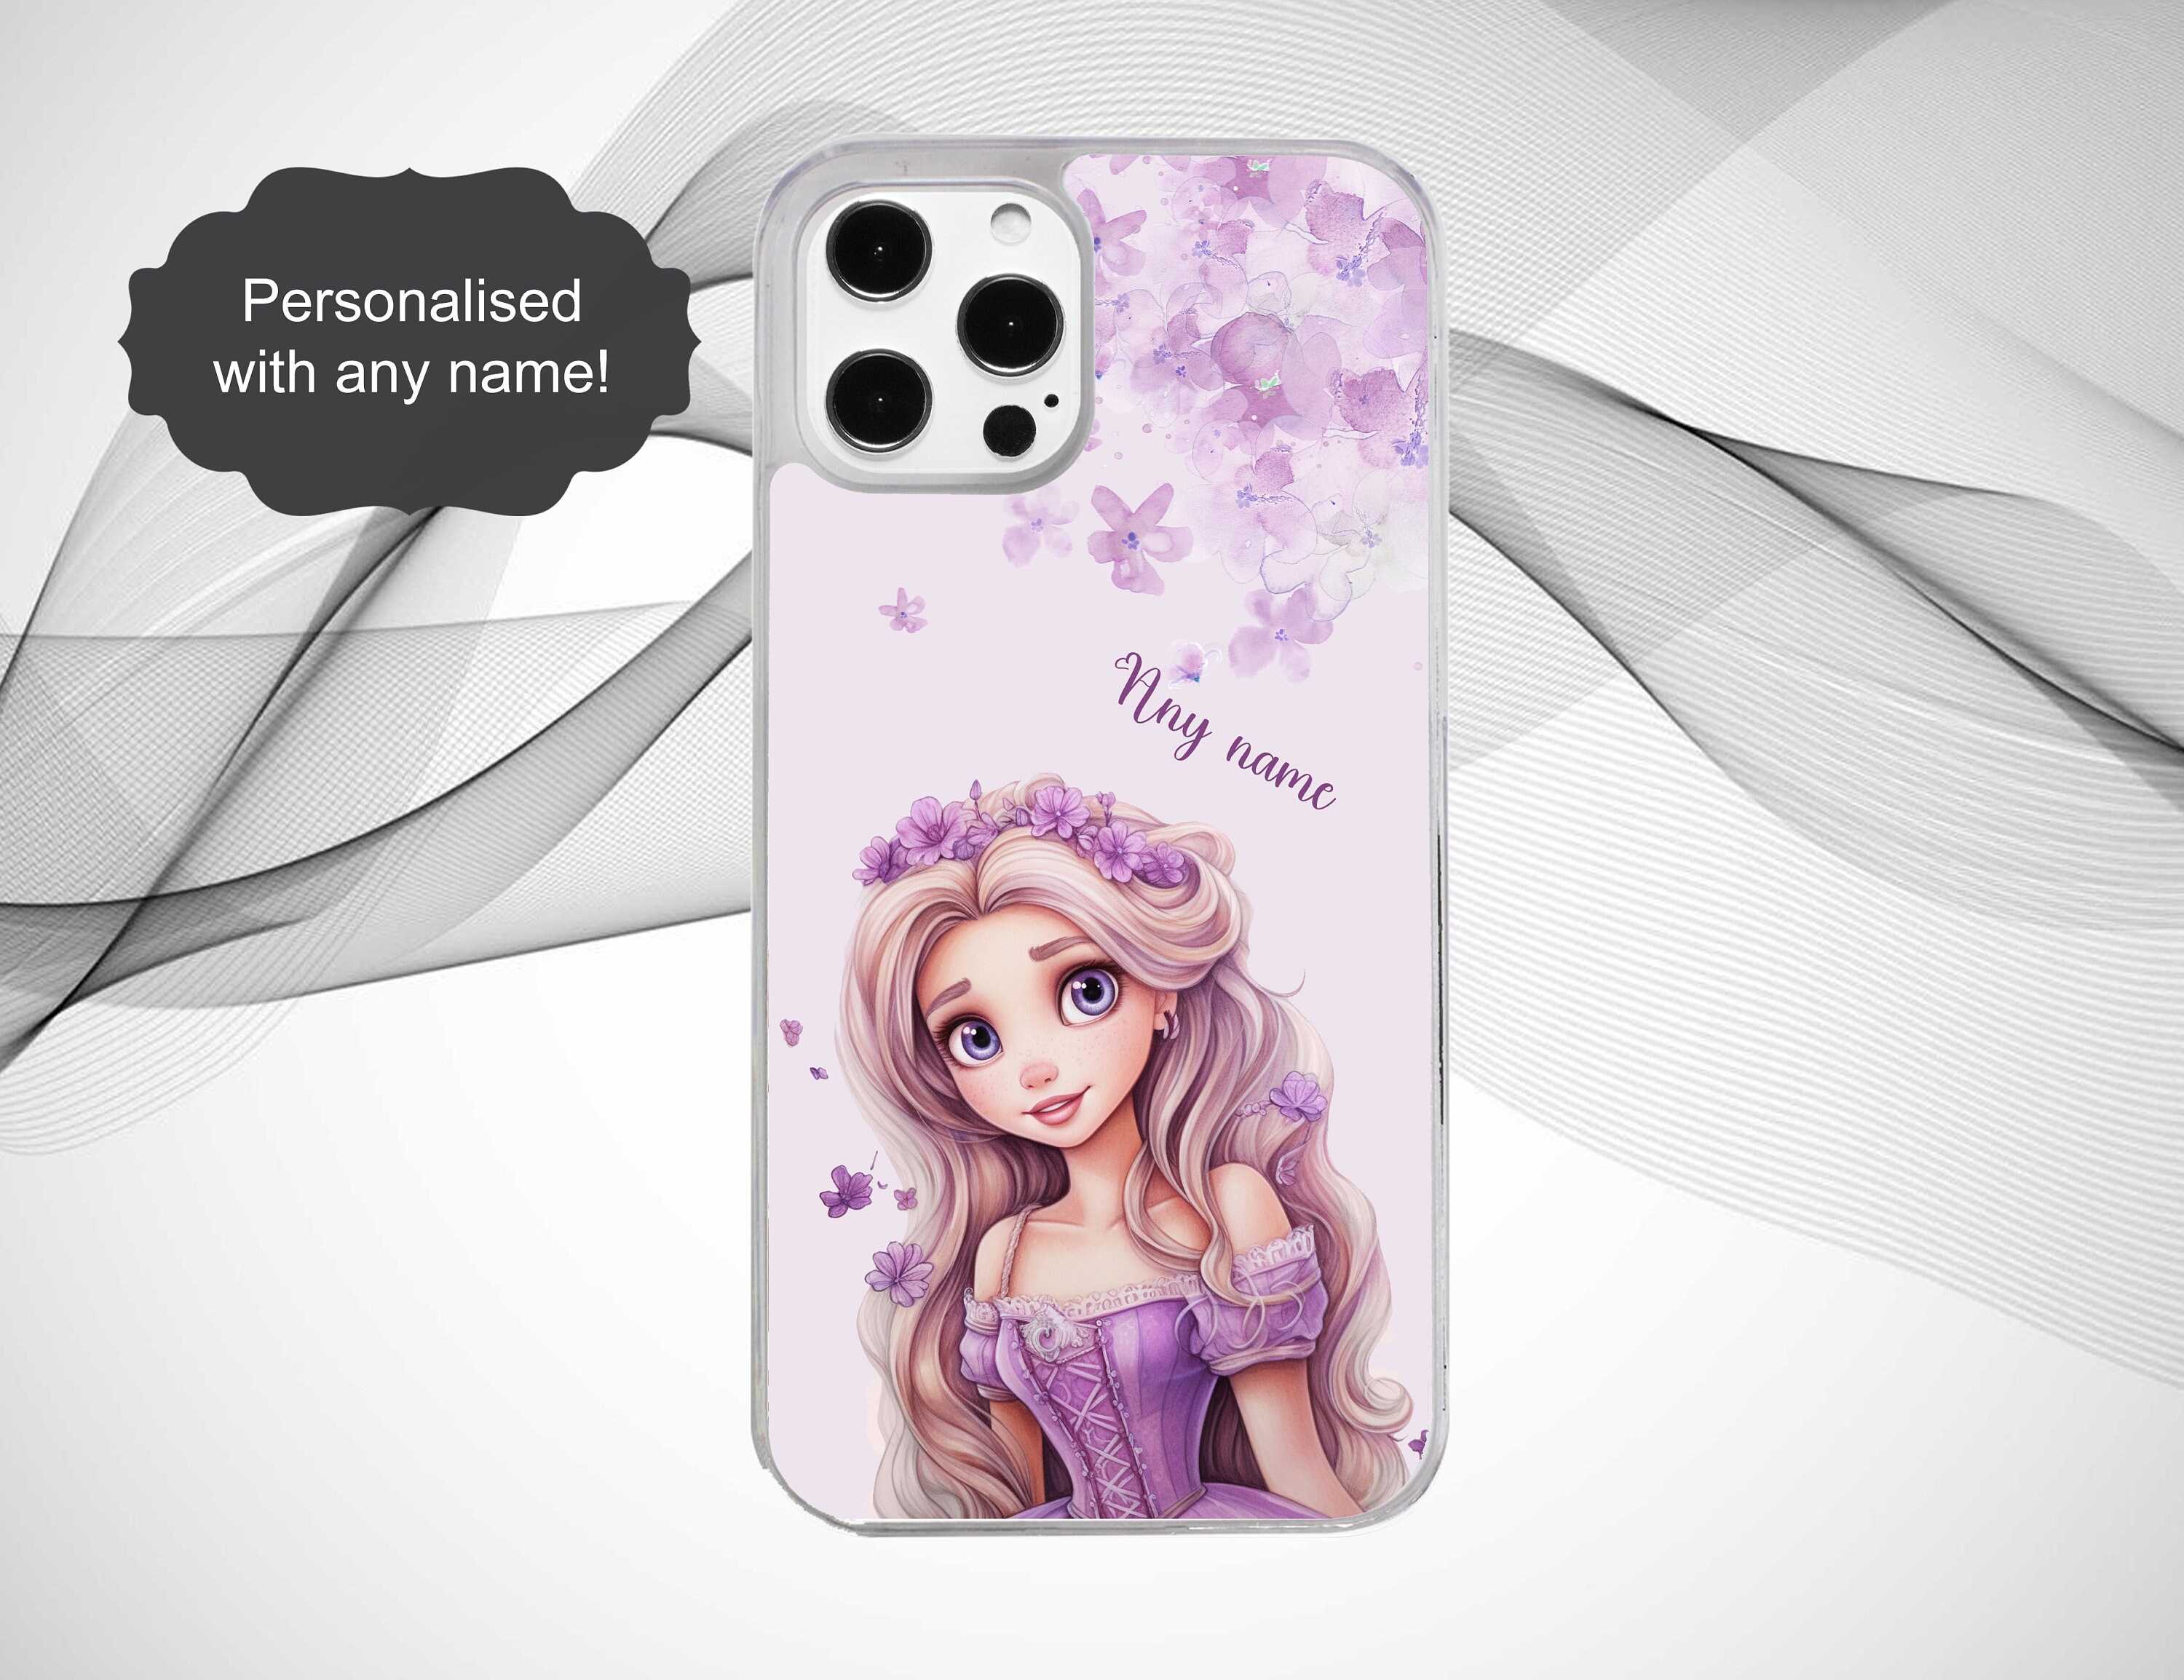 Rapunzel Electrical Outlet and Light Switch Cover Tangled, Tangled Nursery,  Tangled Decoration, TAN4 